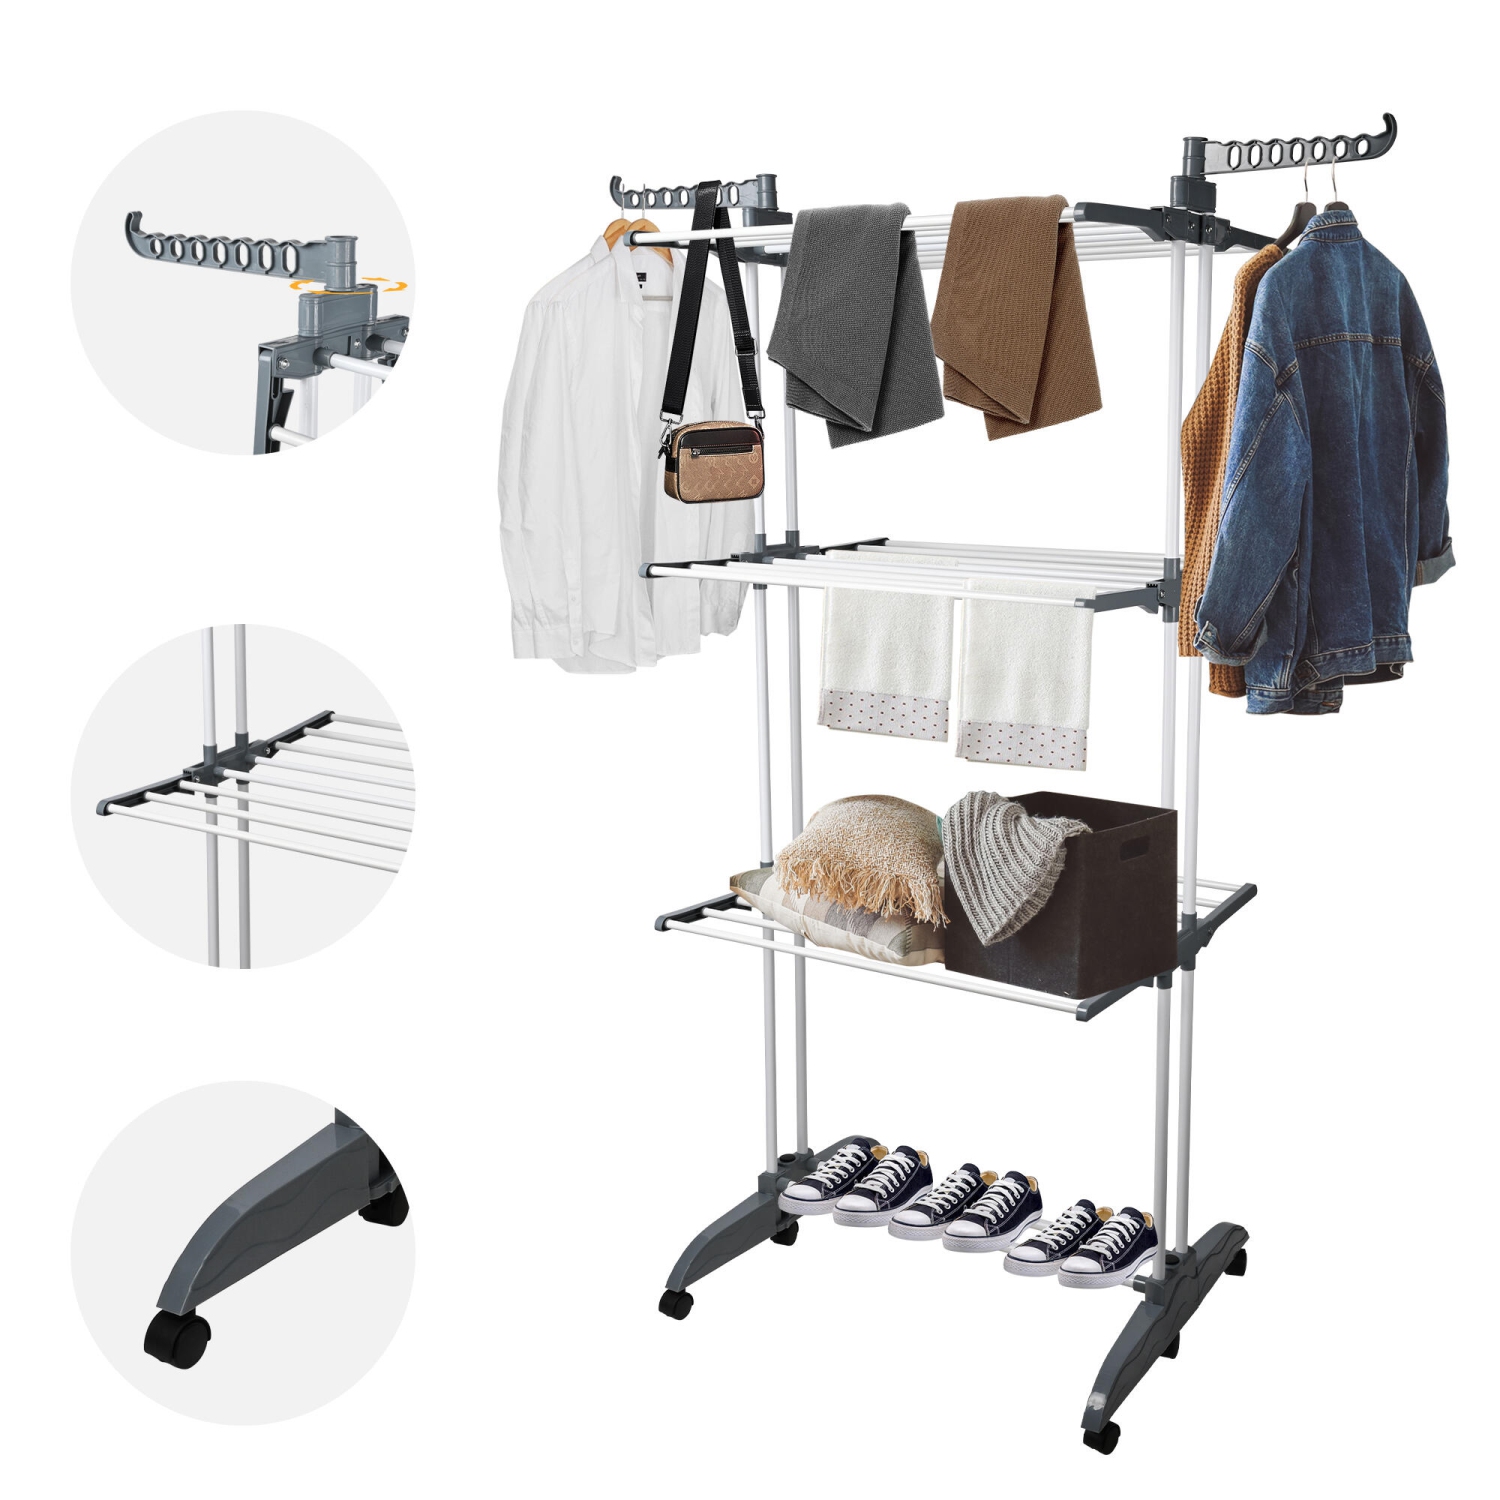 Foldable 4-Tier Clothes Drying Rack, Garment Laundry Hanger Rack with 2 Side Wings and 4 Casters